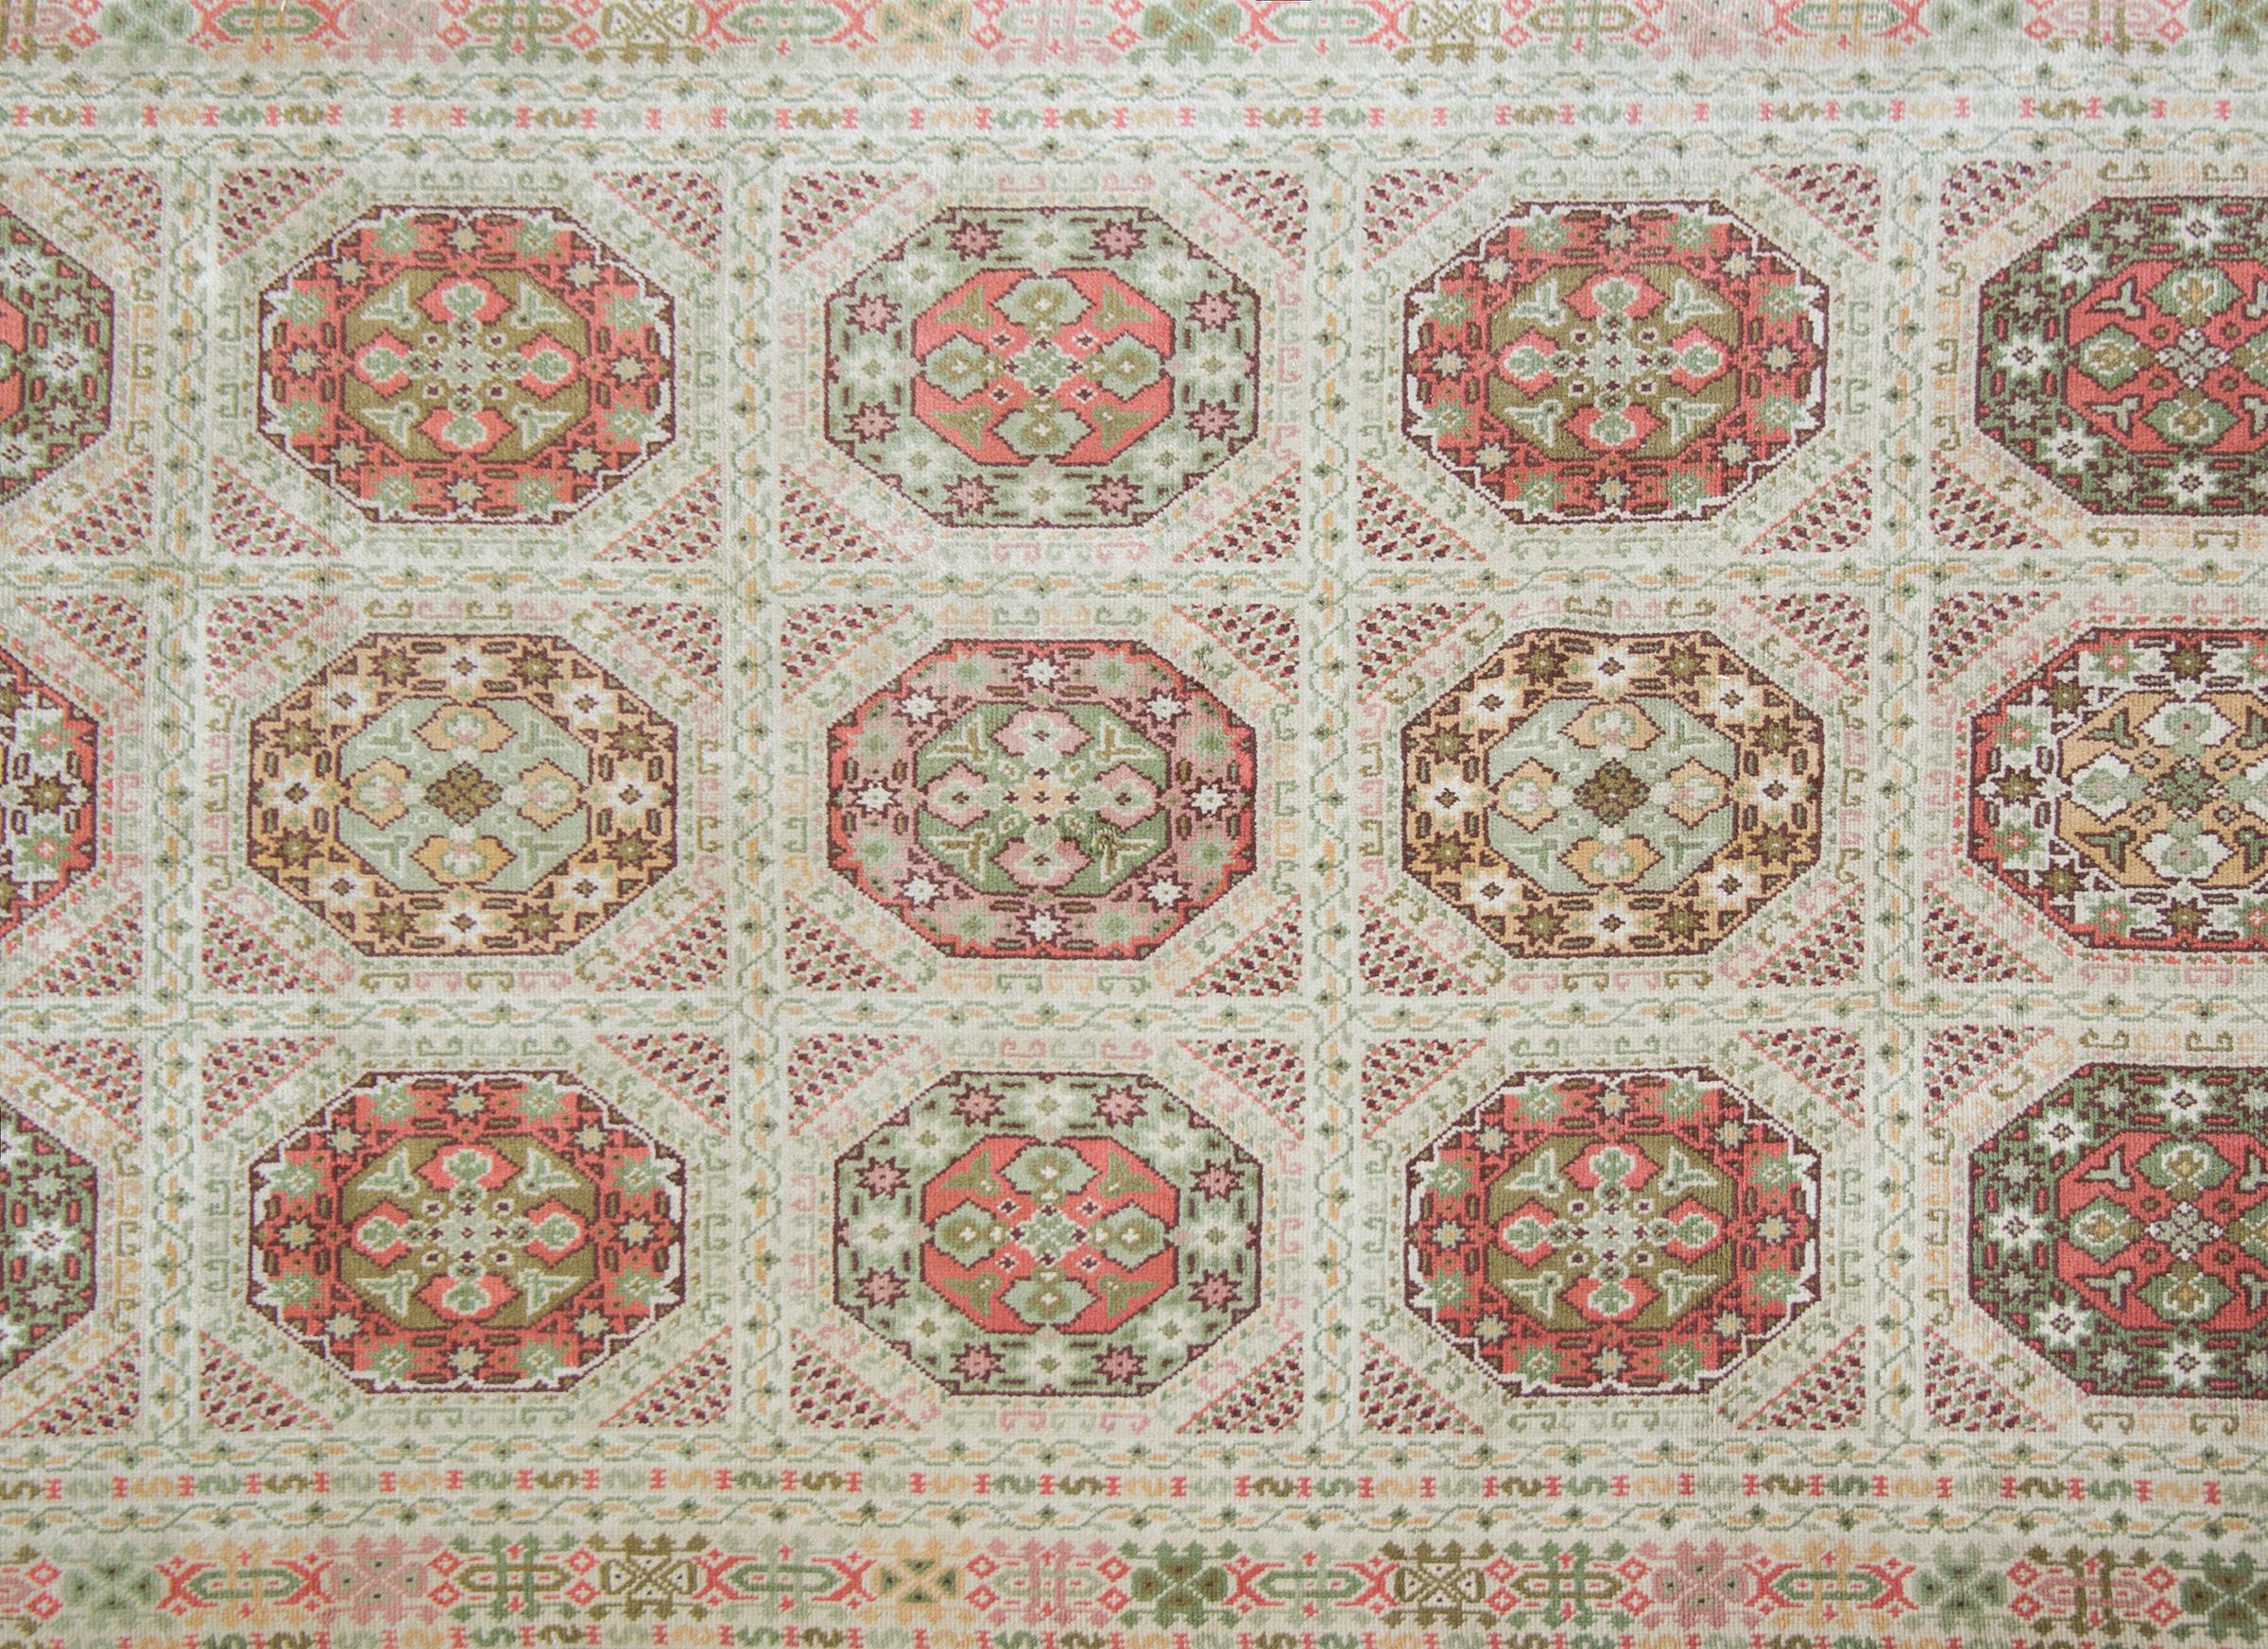 A wonderful early 20th century Austrian hand knotted wool rug with a repeated octagonal medallion and trellis pattern with myriad stylized flowers and scrolling vines and surrounded by a border with multiple thin stripes with more stylized flowers